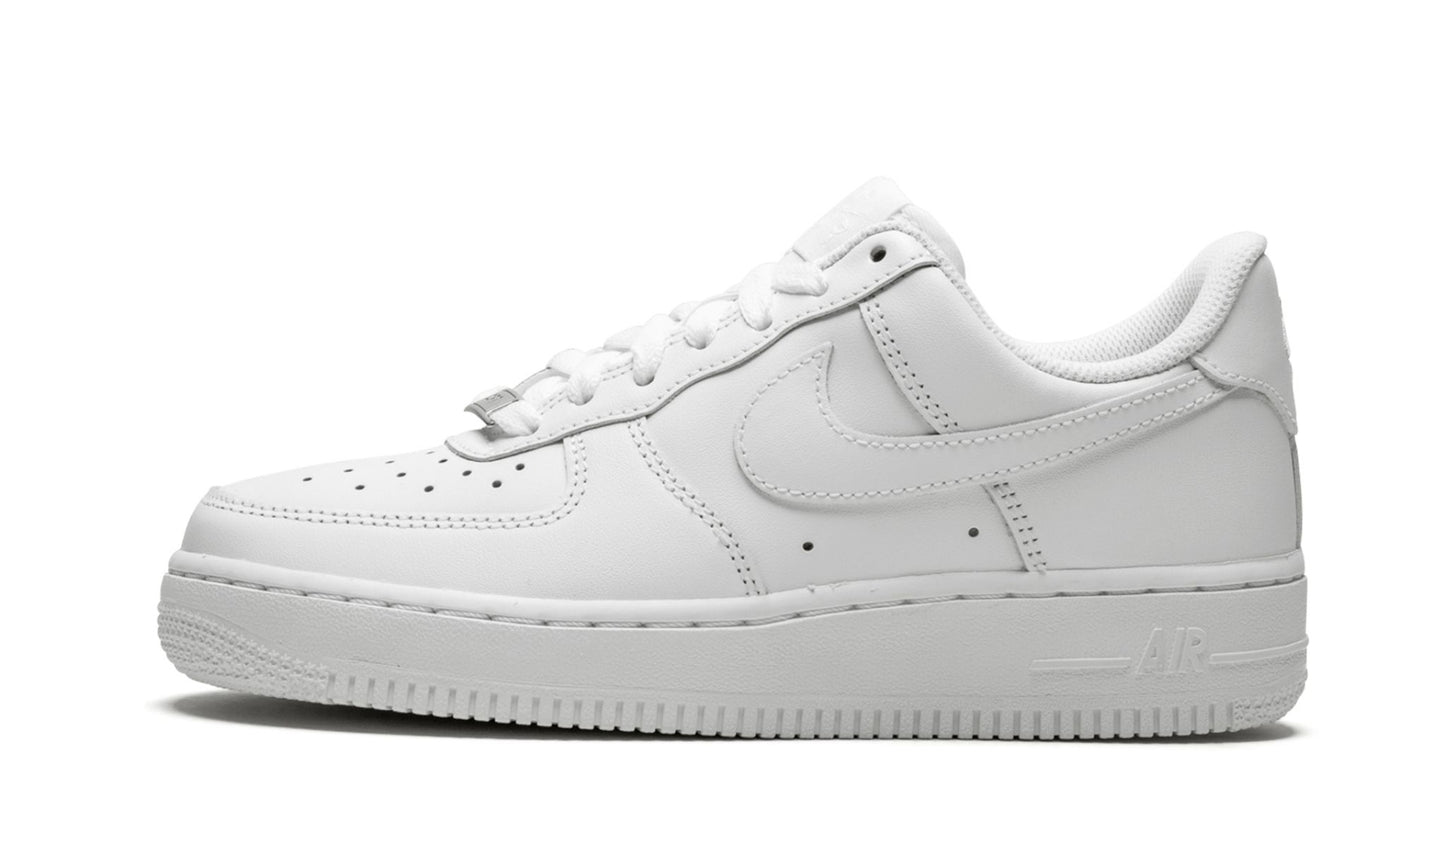 Wmns Air Force 1 '07 "White on White"